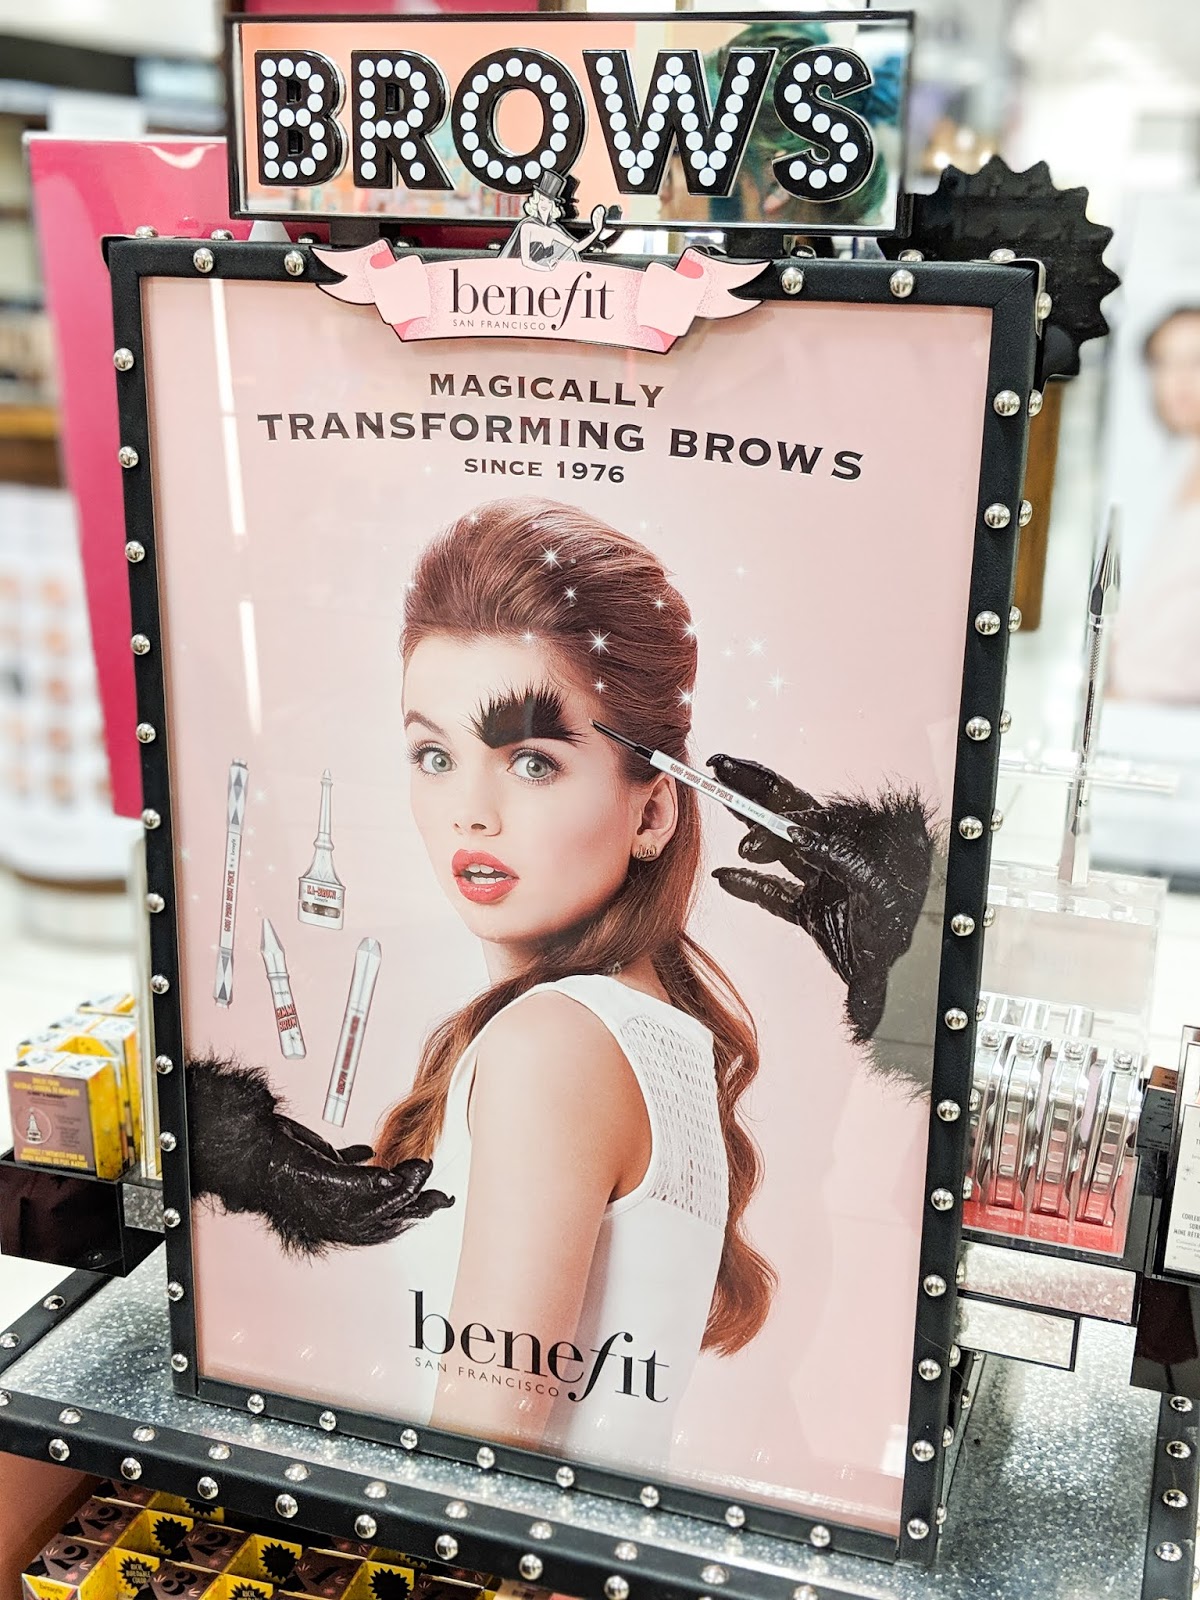 benefit soft and natural brows review